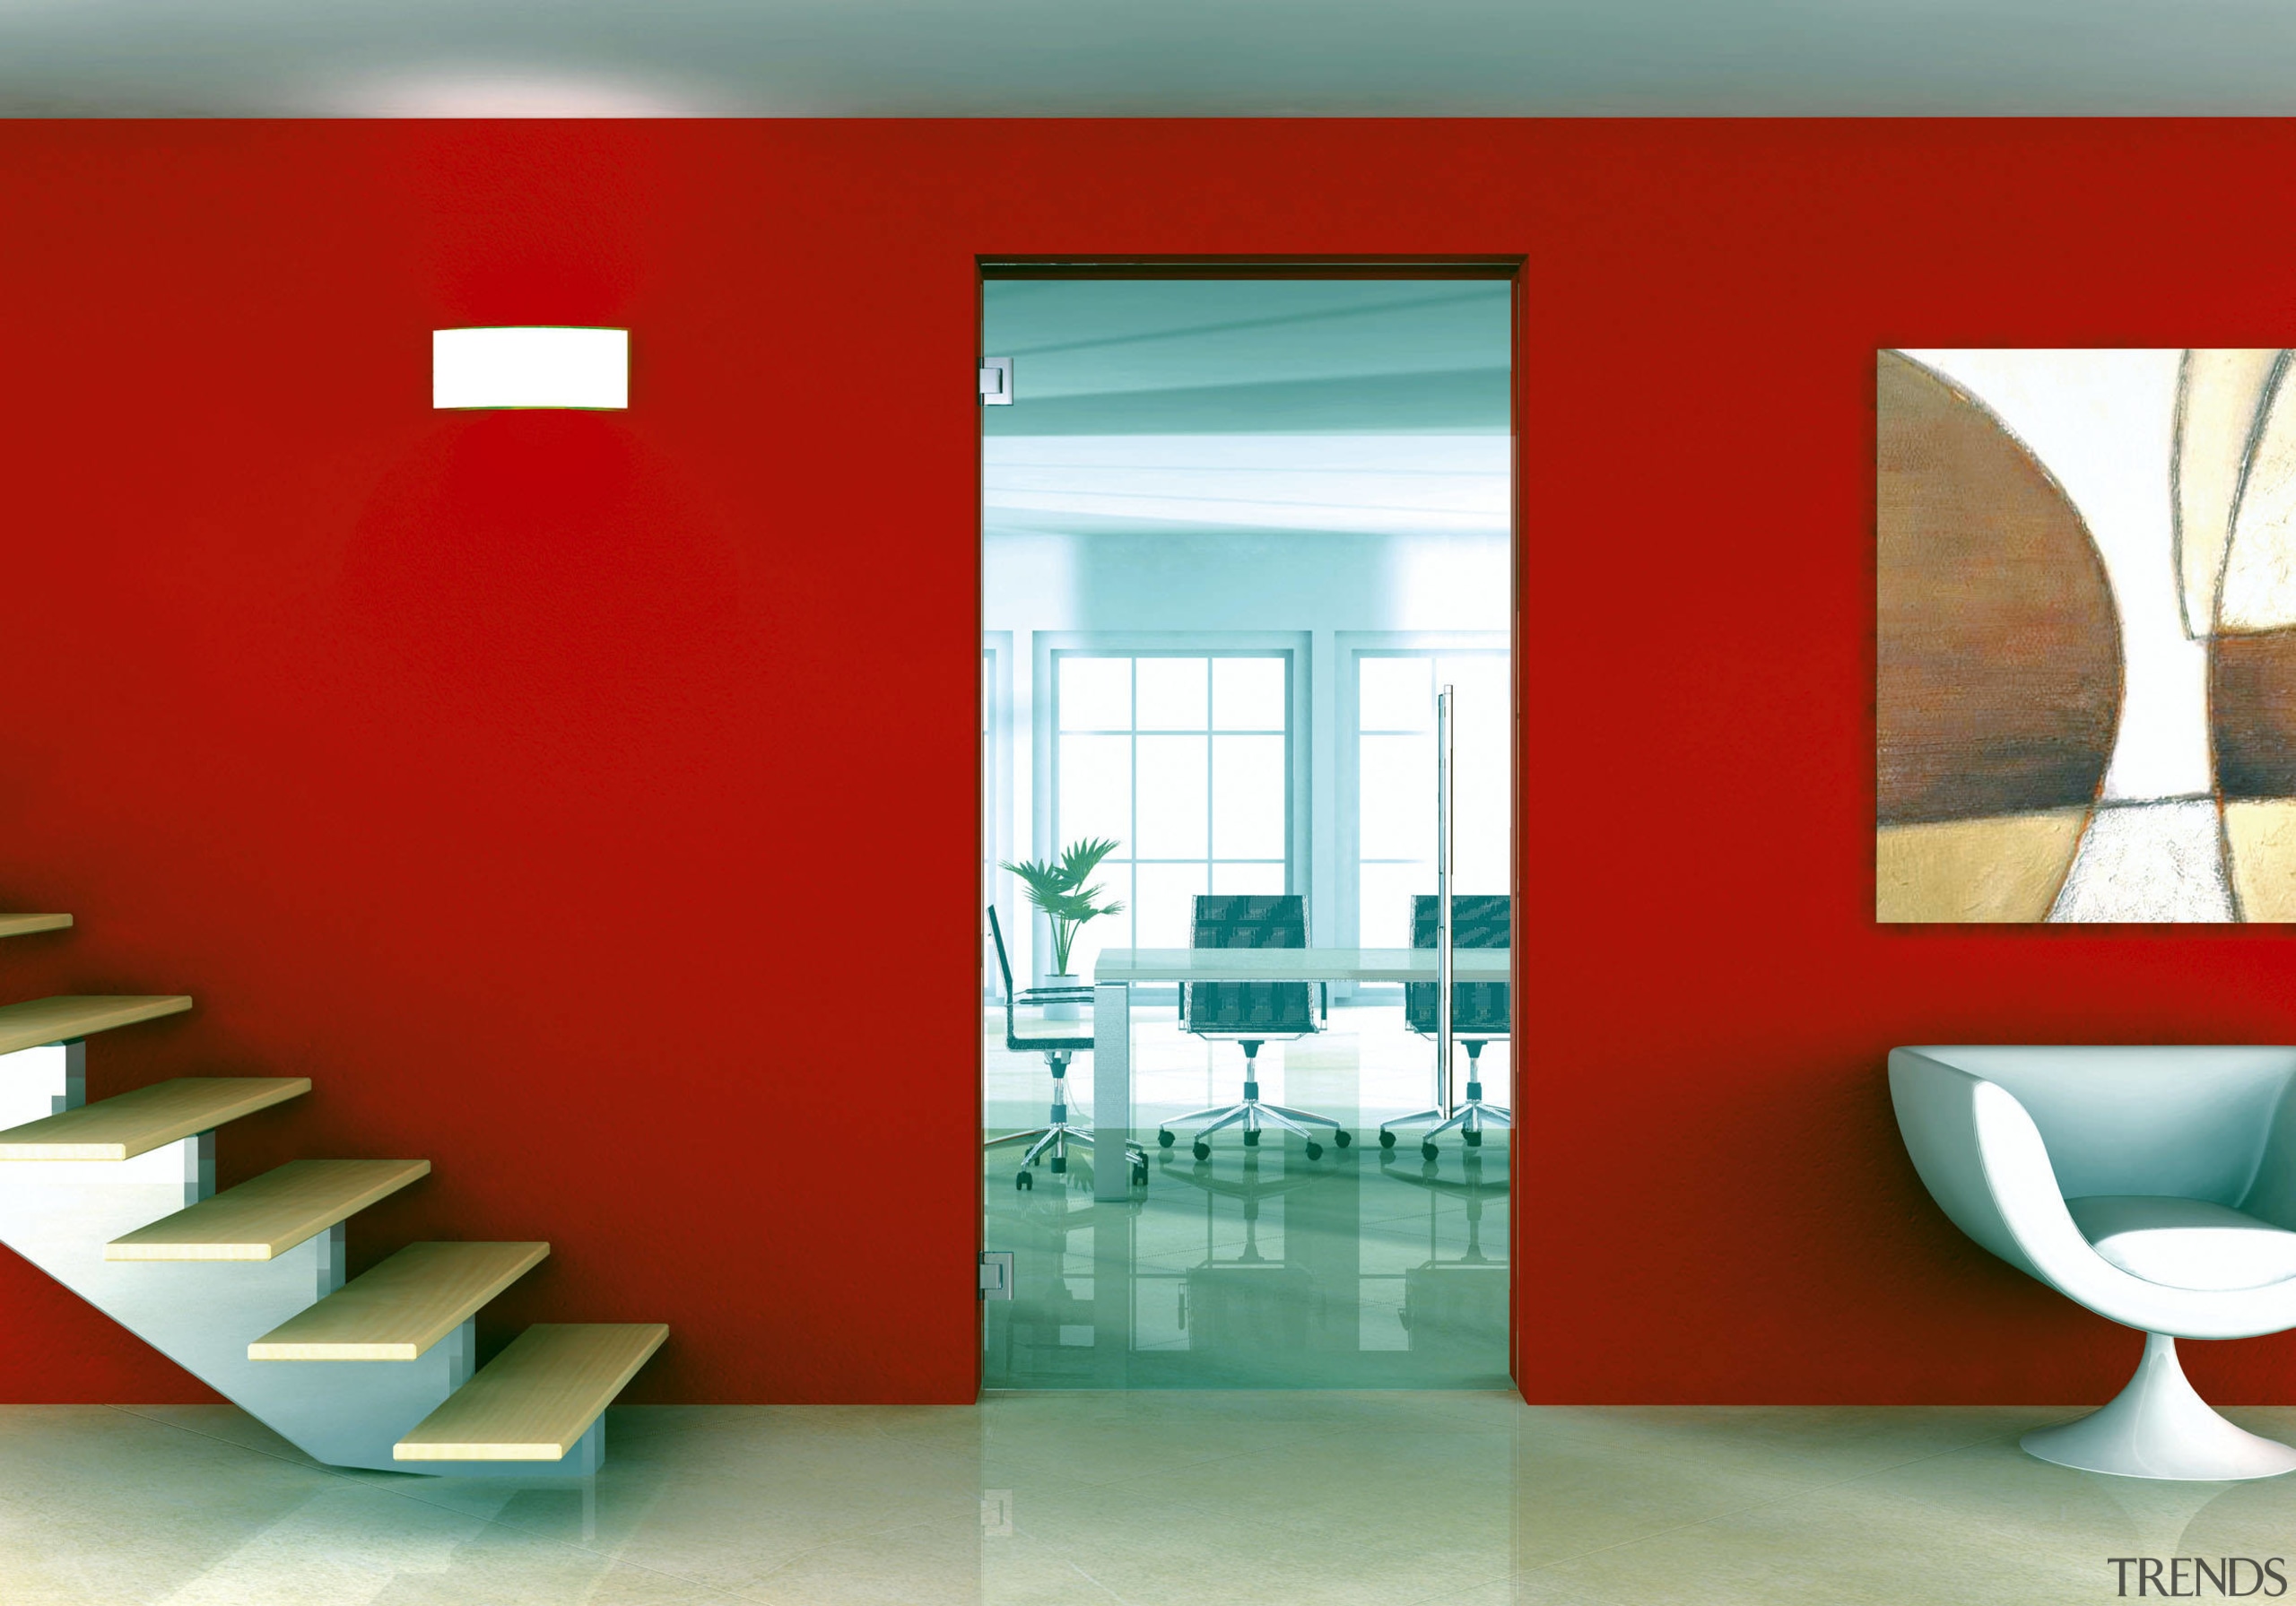 View of interior glazing and glass hardware available door, interior design, modern art, product design, table, wall, red